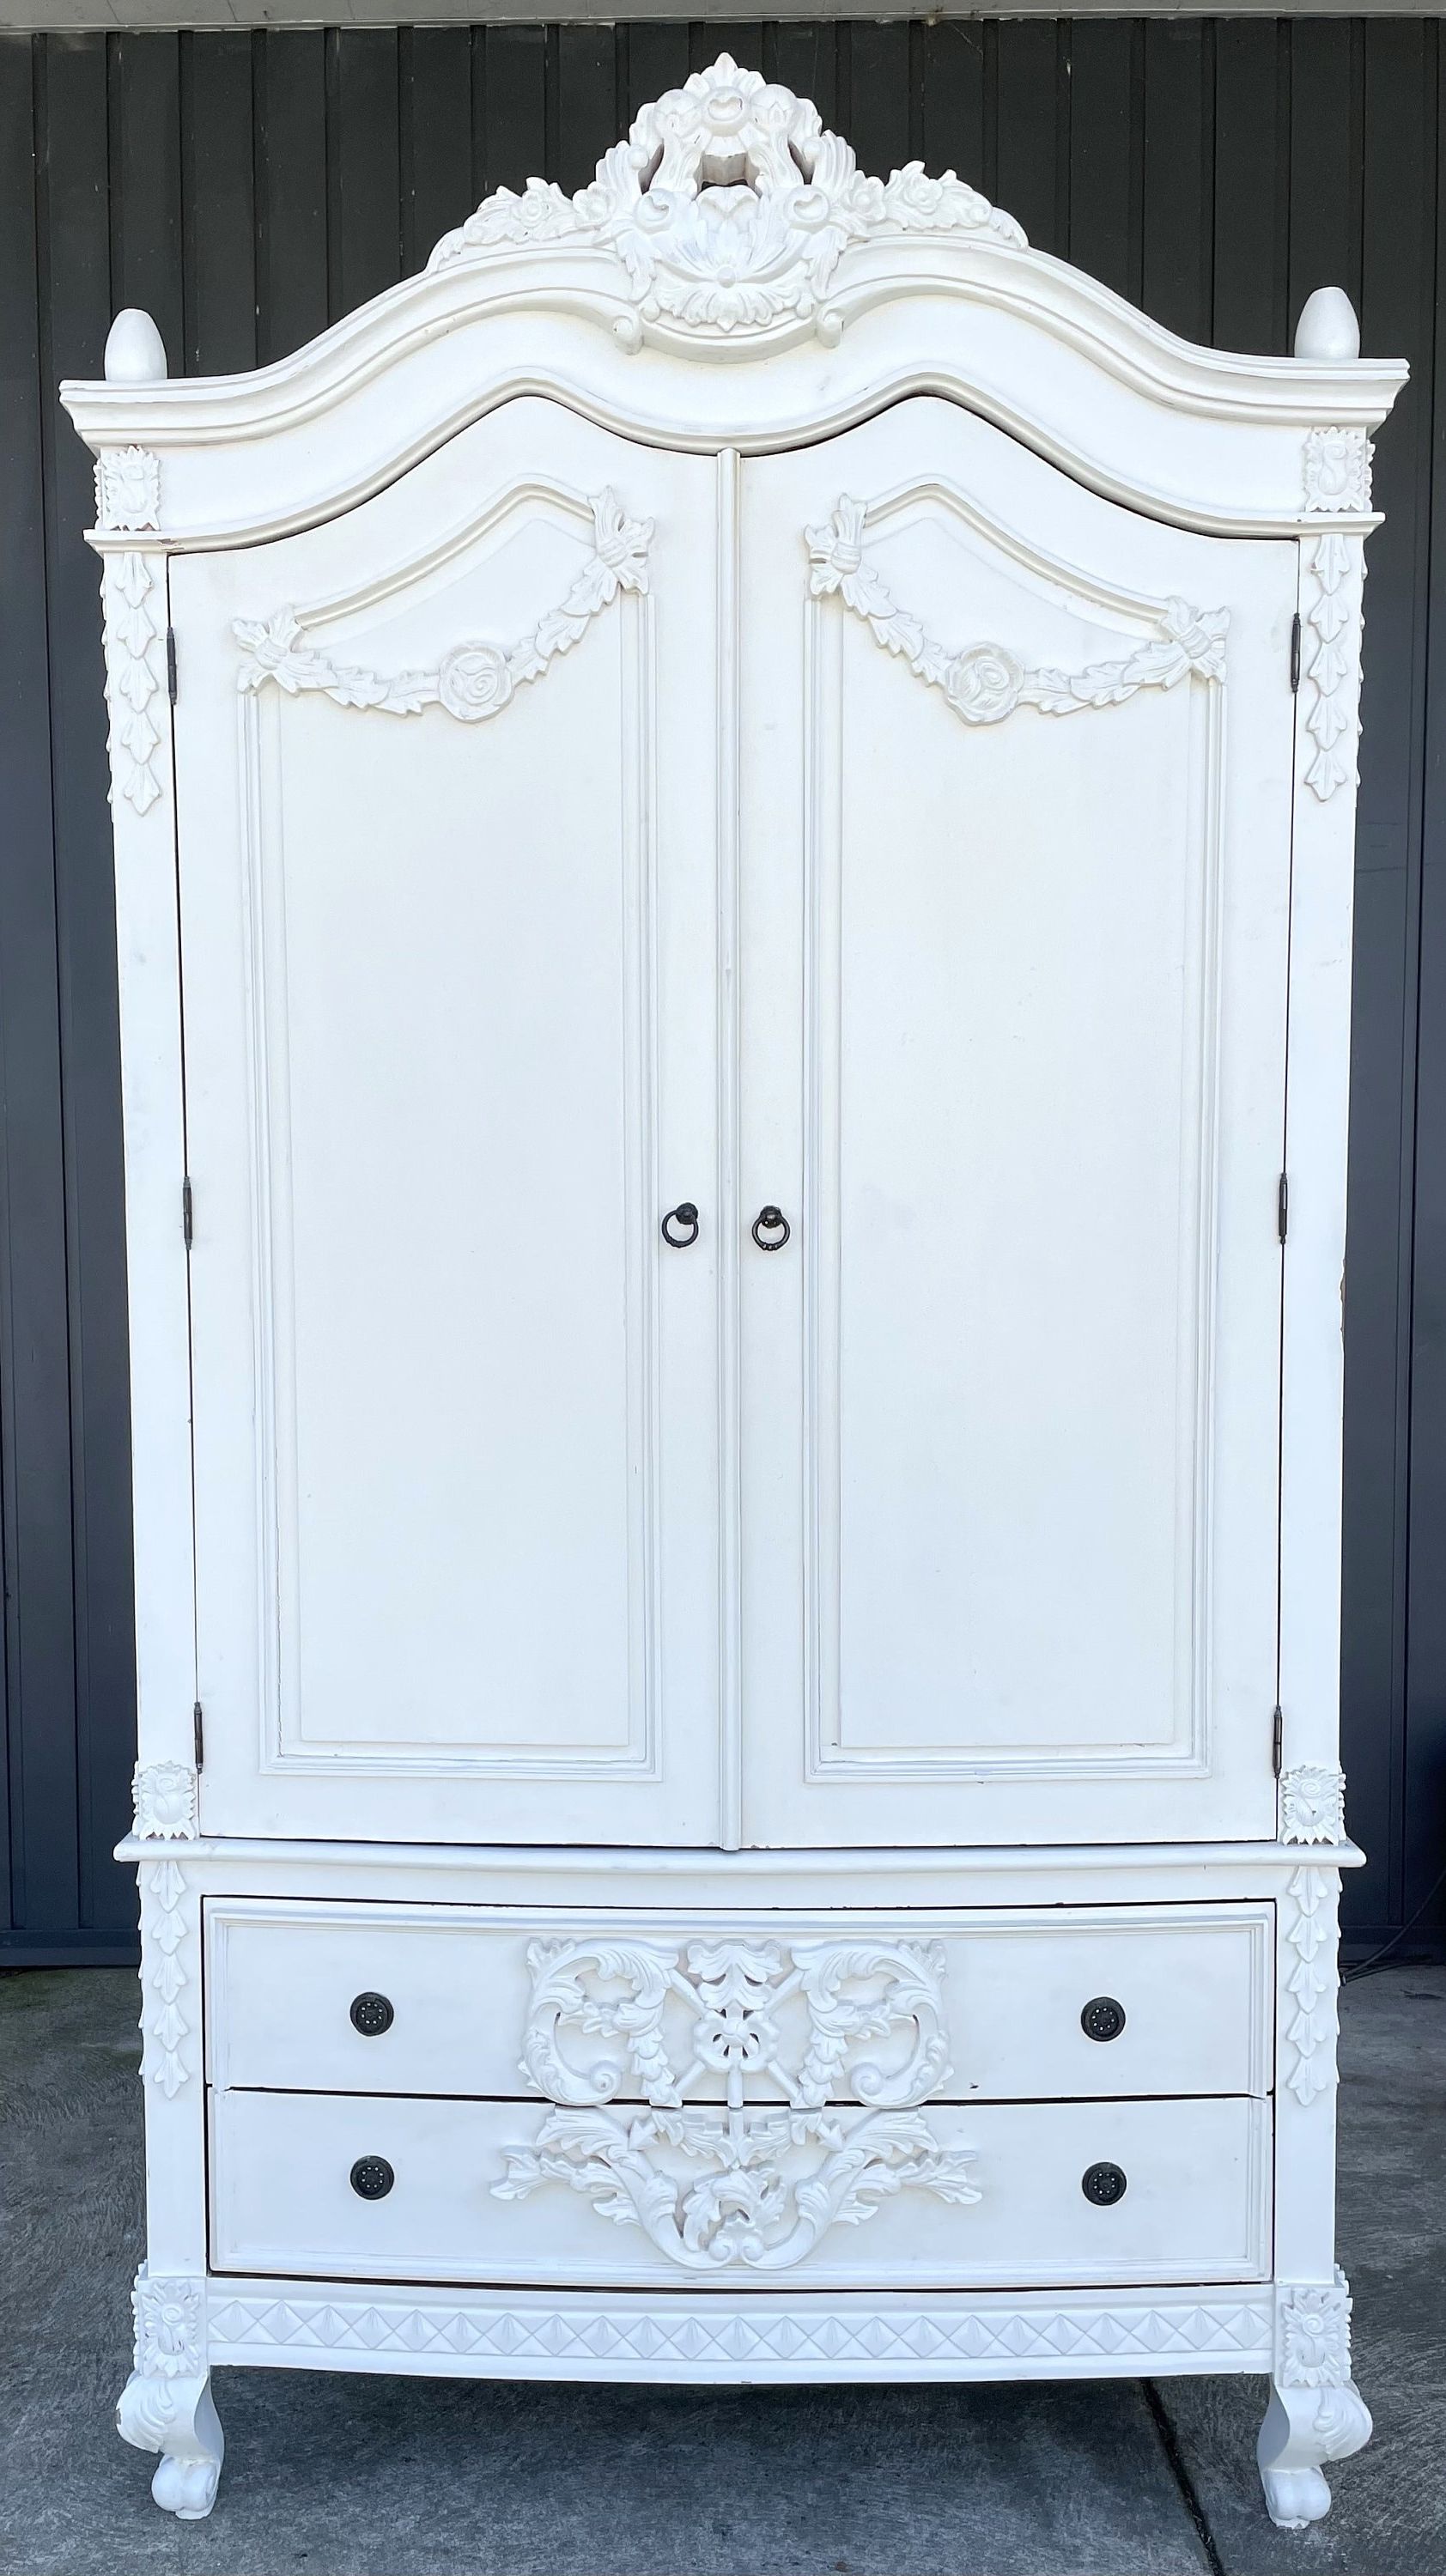 Shabby Chic Distressed White Vintage Style French Baroque – Etsy Pertaining To White French Armoire Wardrobes (Gallery 5 of 20)